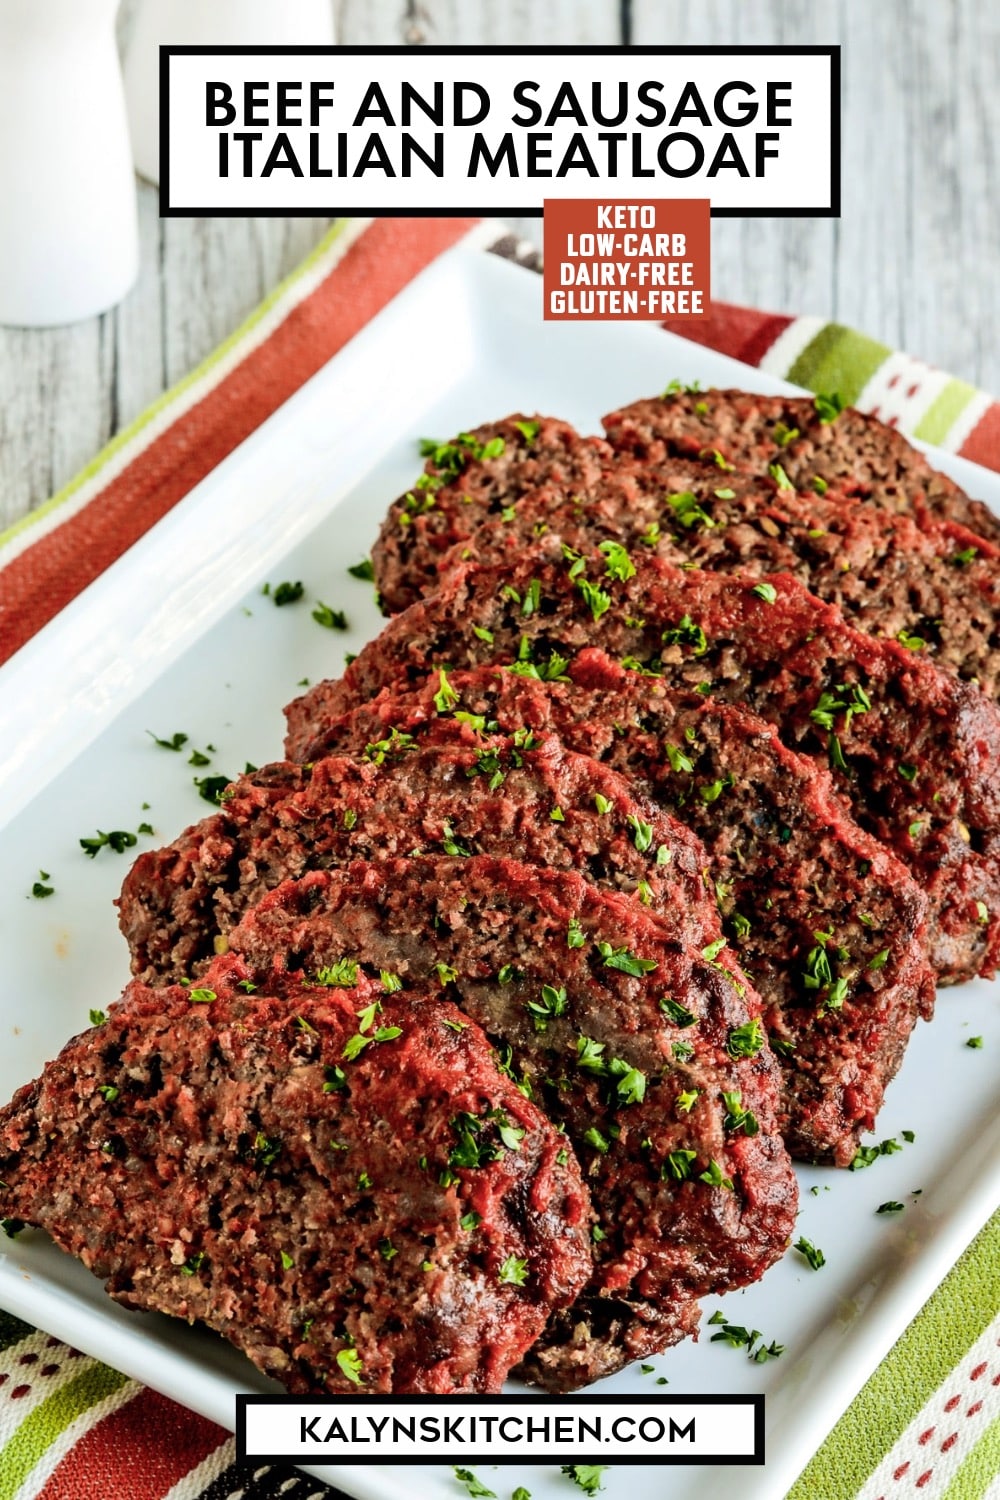 Pinterest image of Beef and Sausage Italian Meatloaf